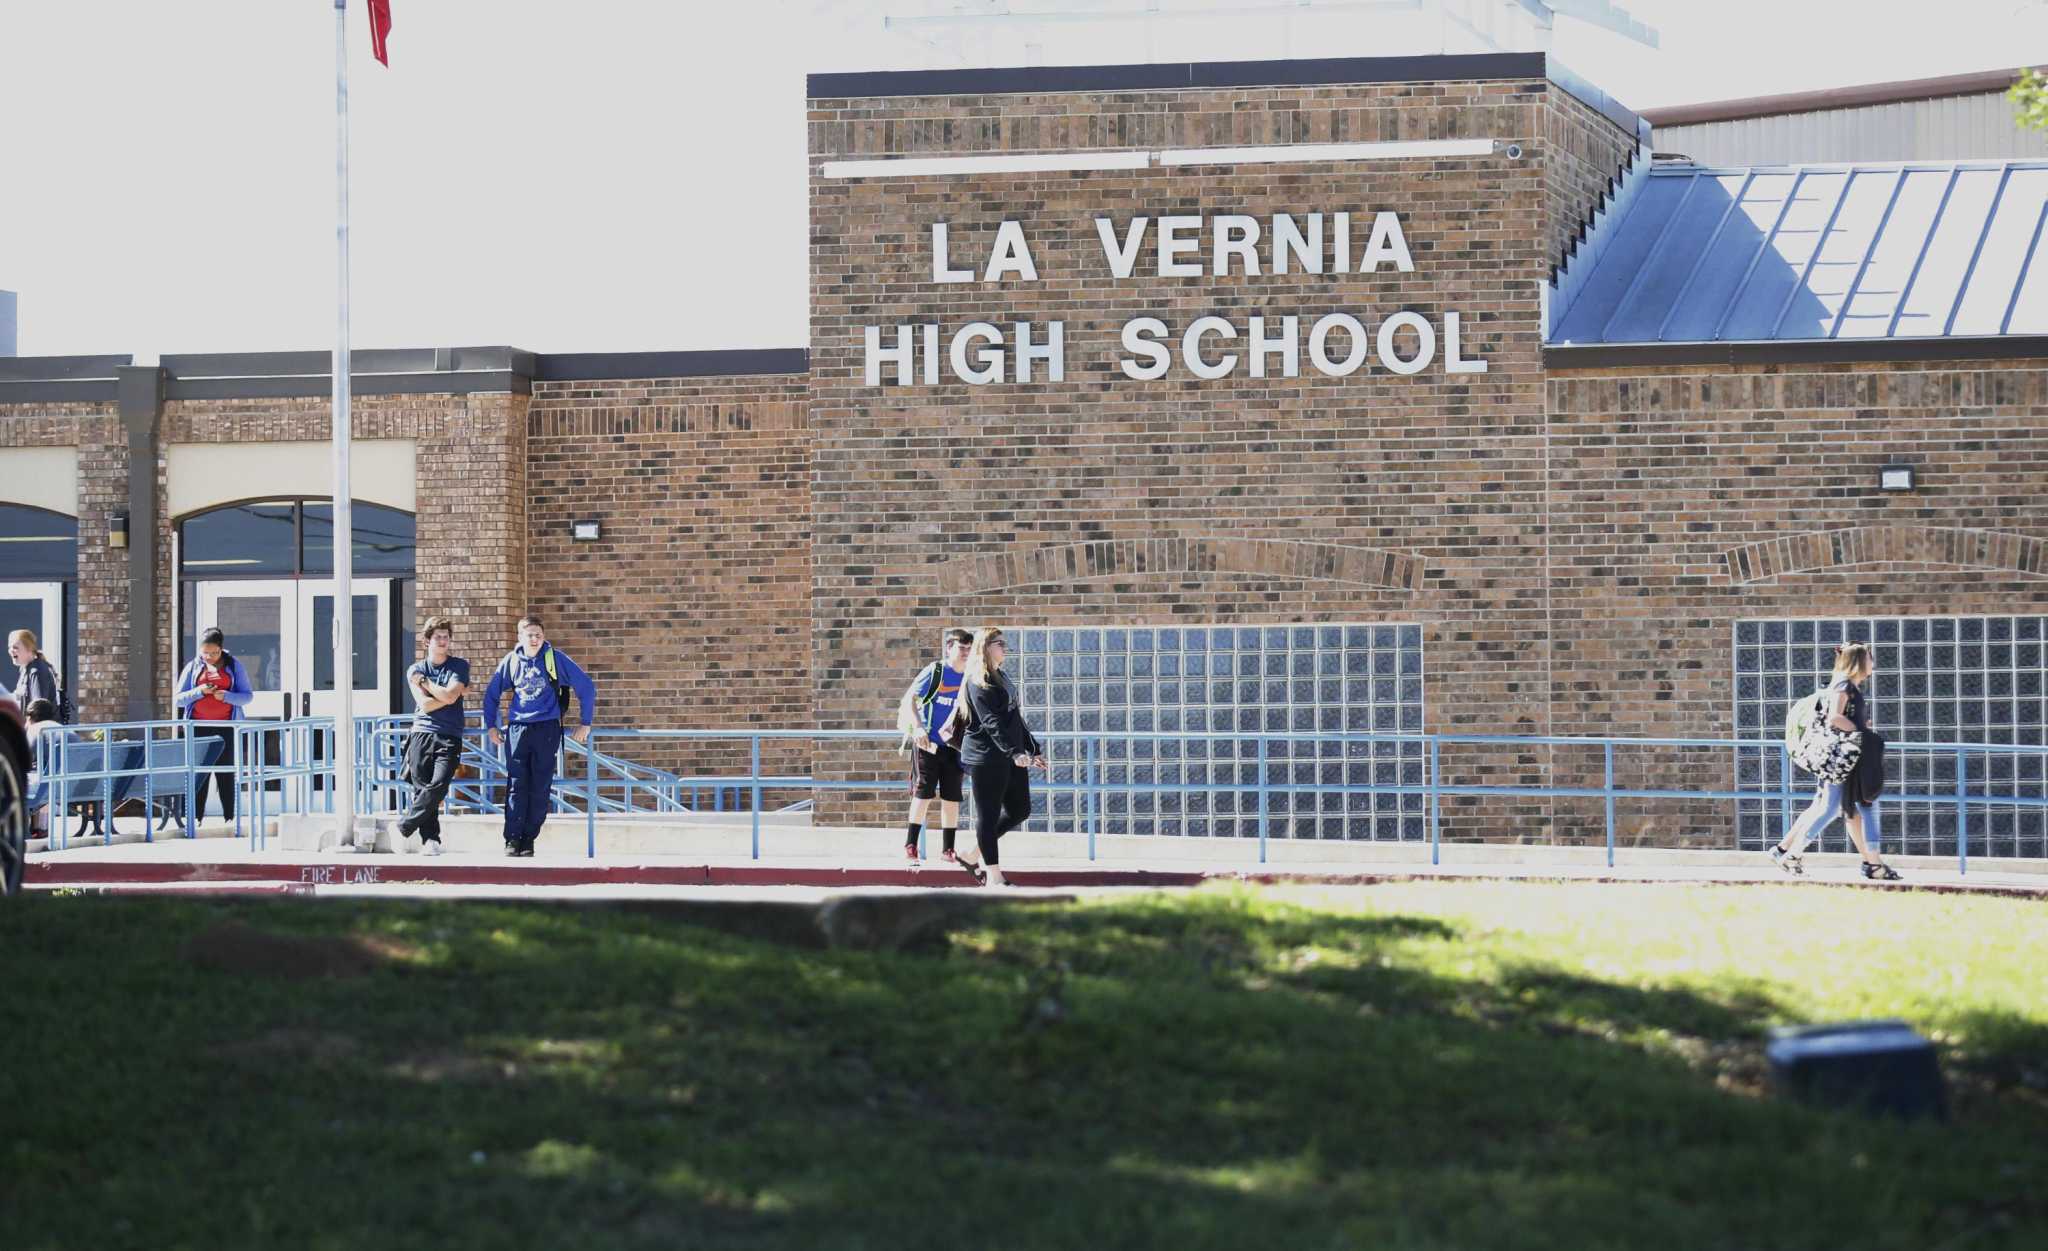 Students from La Vernia High School leave the campus after the final bell on Thursday, Mar. 30, 2017. In the wake of recent events which resulted in arrests of 10 students for hazing other students and charged with sexual assault, La Vernia ISD Superintendent Jose H. Moreno has urged his staff, administrators and teachers to help students return to normalcy. Citing that the students charged are a mere small percentage of their high school population which is about 1,075 enrolled, Moreno suggests that the alleged horrific acts taken were fostered by an "underground culture of acceptance" and are not in accordance to the district's core values. At the high school, Moreno said educators will help students acknowledge that something occurred, that things will be okay and that "we are moving forward" with their commitment to the students and to education. On Thursday, Mar. 30, 2017, as part of that return to normalcy, the high school baseball team returned to practice. (Kin Man Hui/San Antonio Express-News)